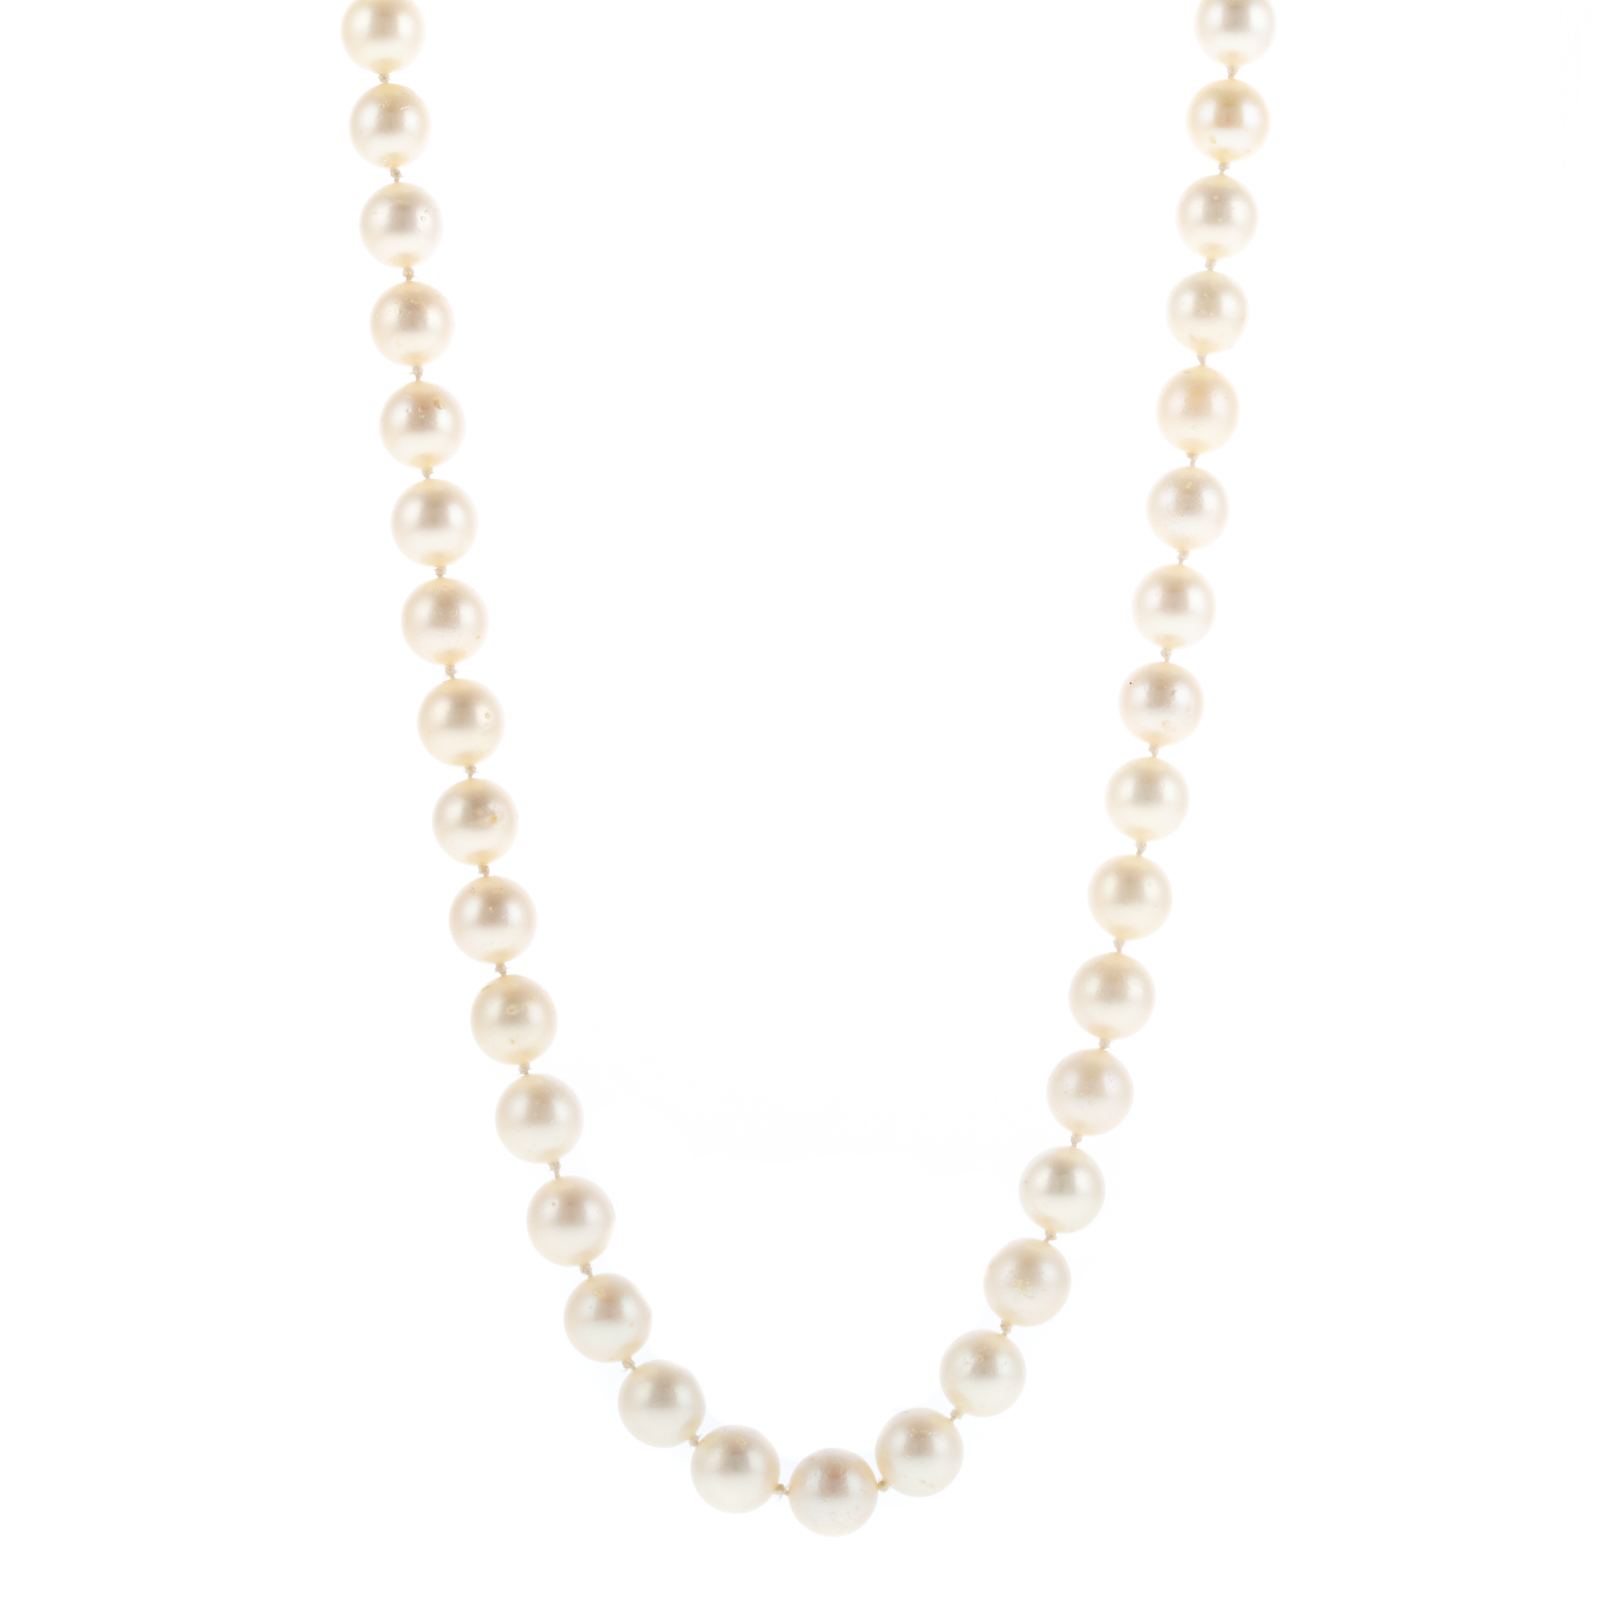 A STRAND OF CULTURED PEARLS WITH